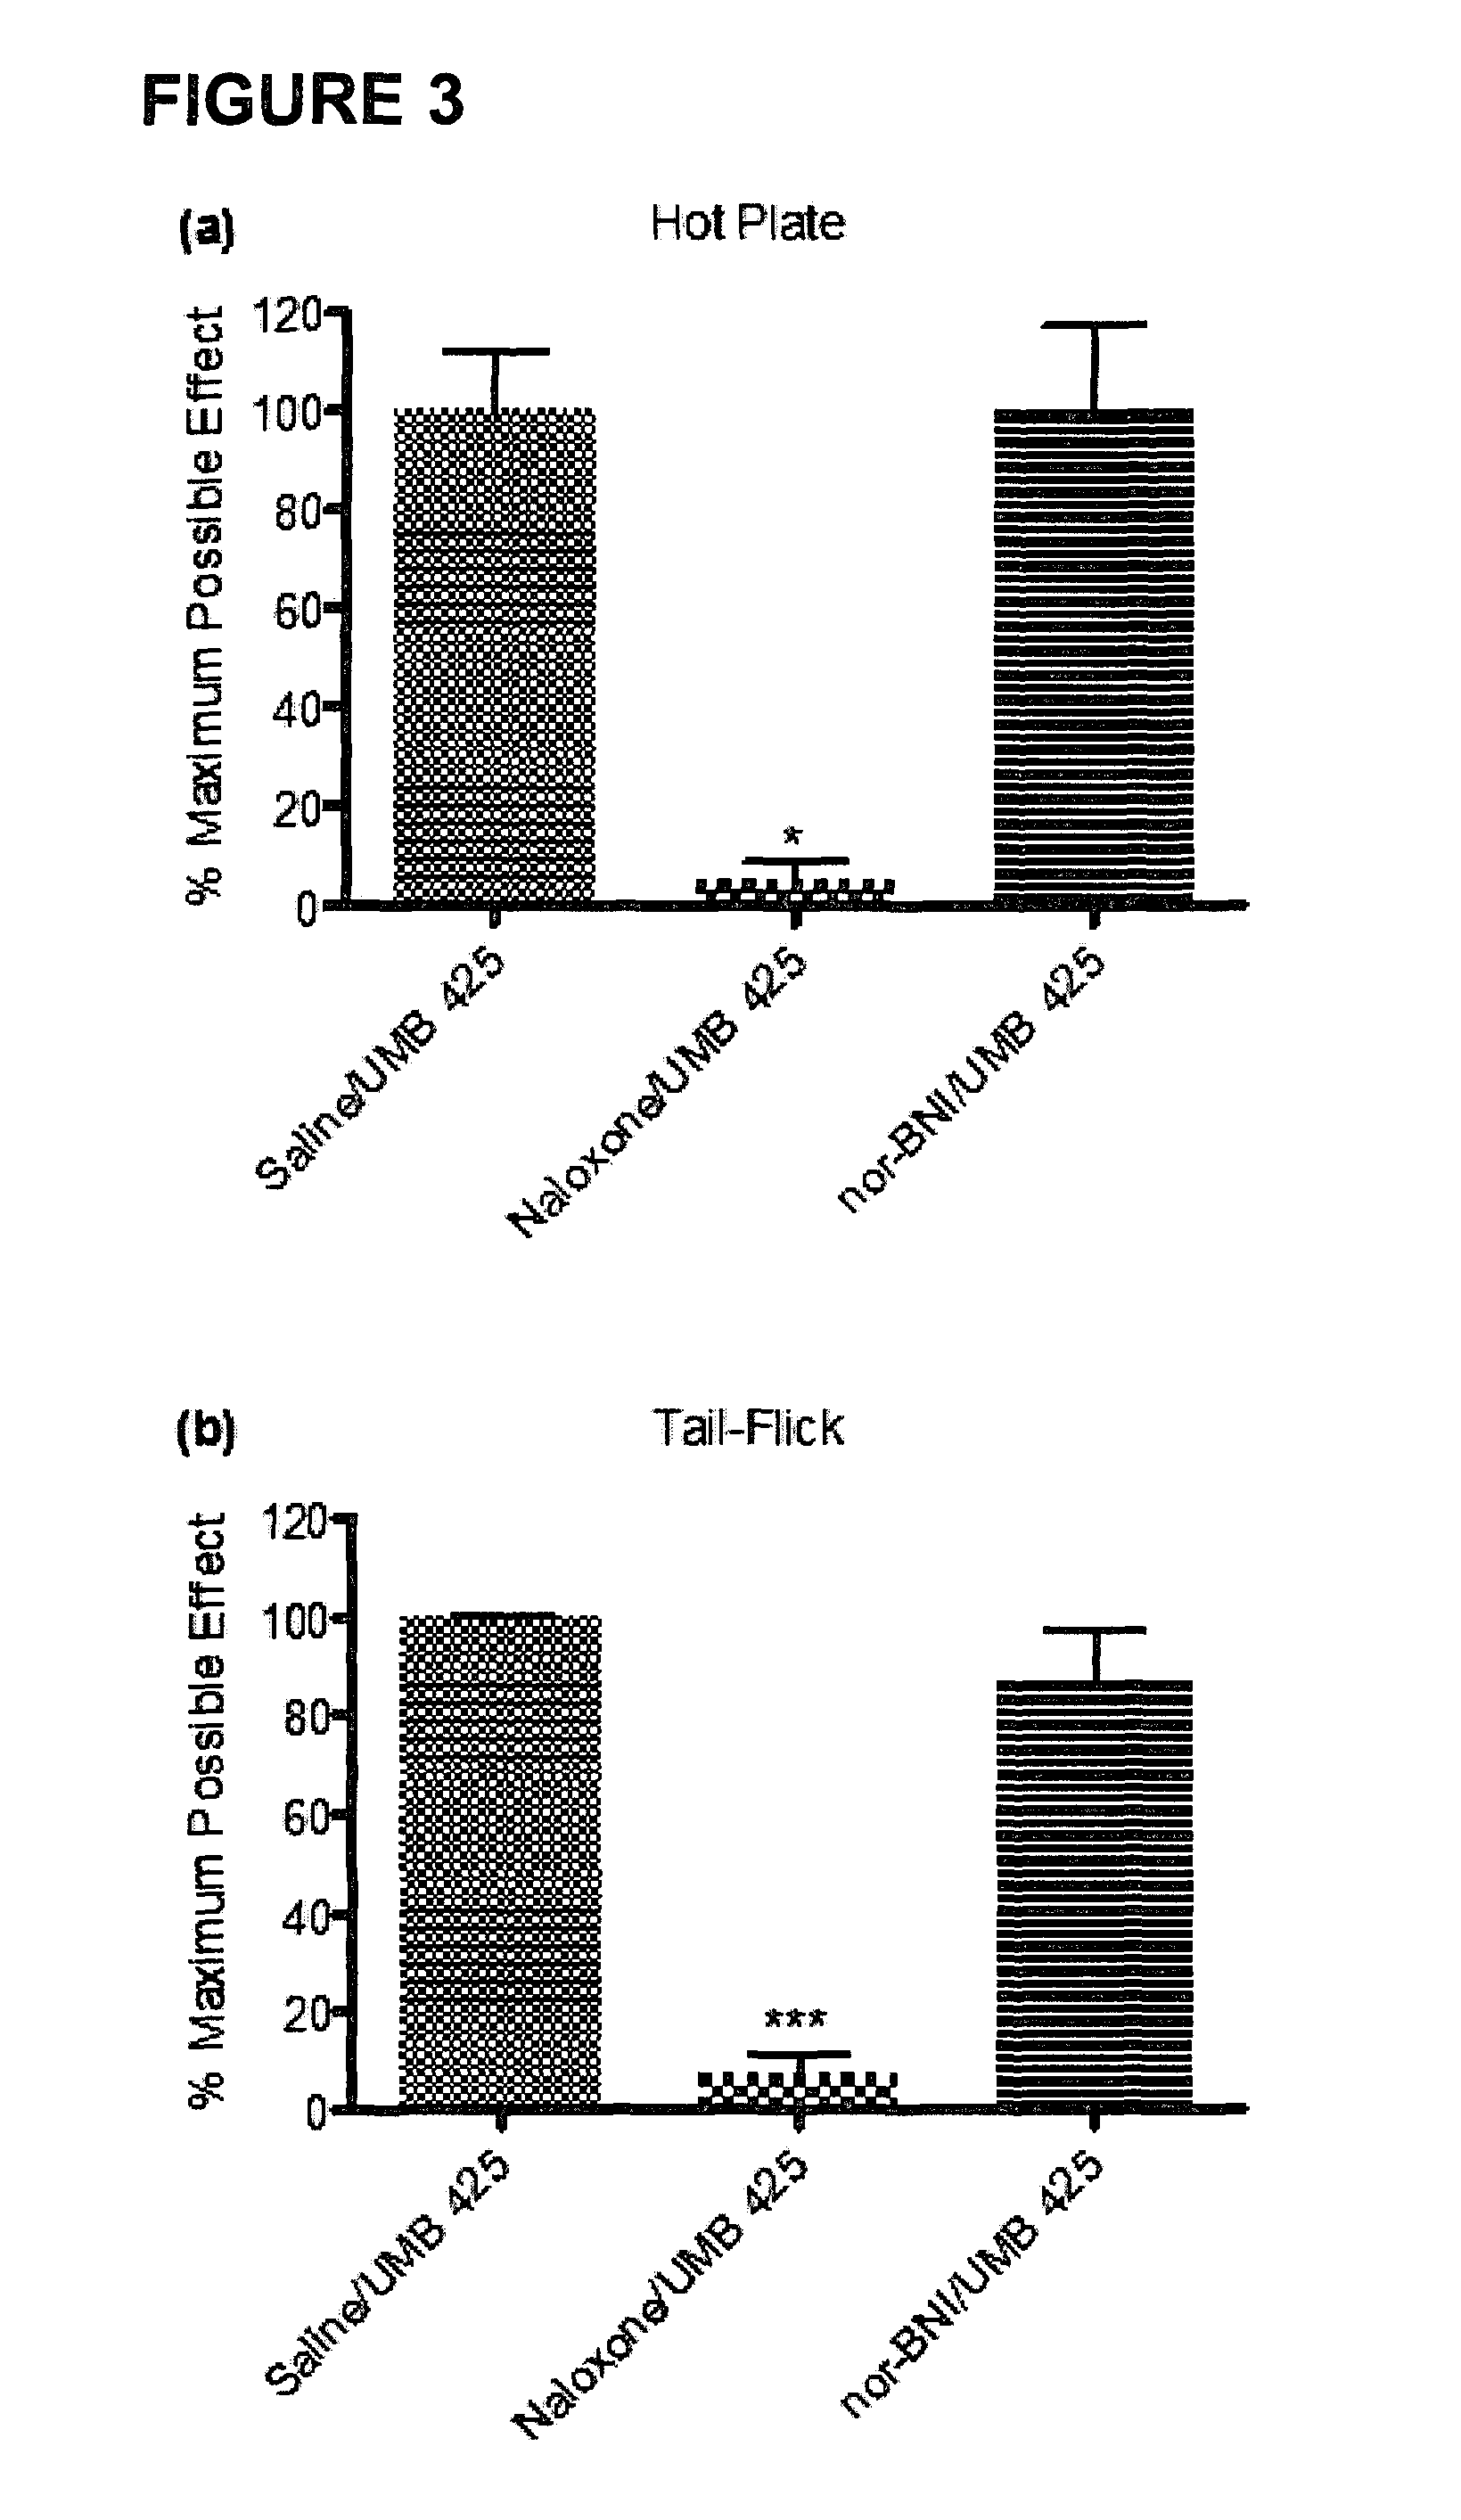 Mixed μ agonist/ δ antagonist opioid analgesics with reduced tolerance liabilities and uses thereof